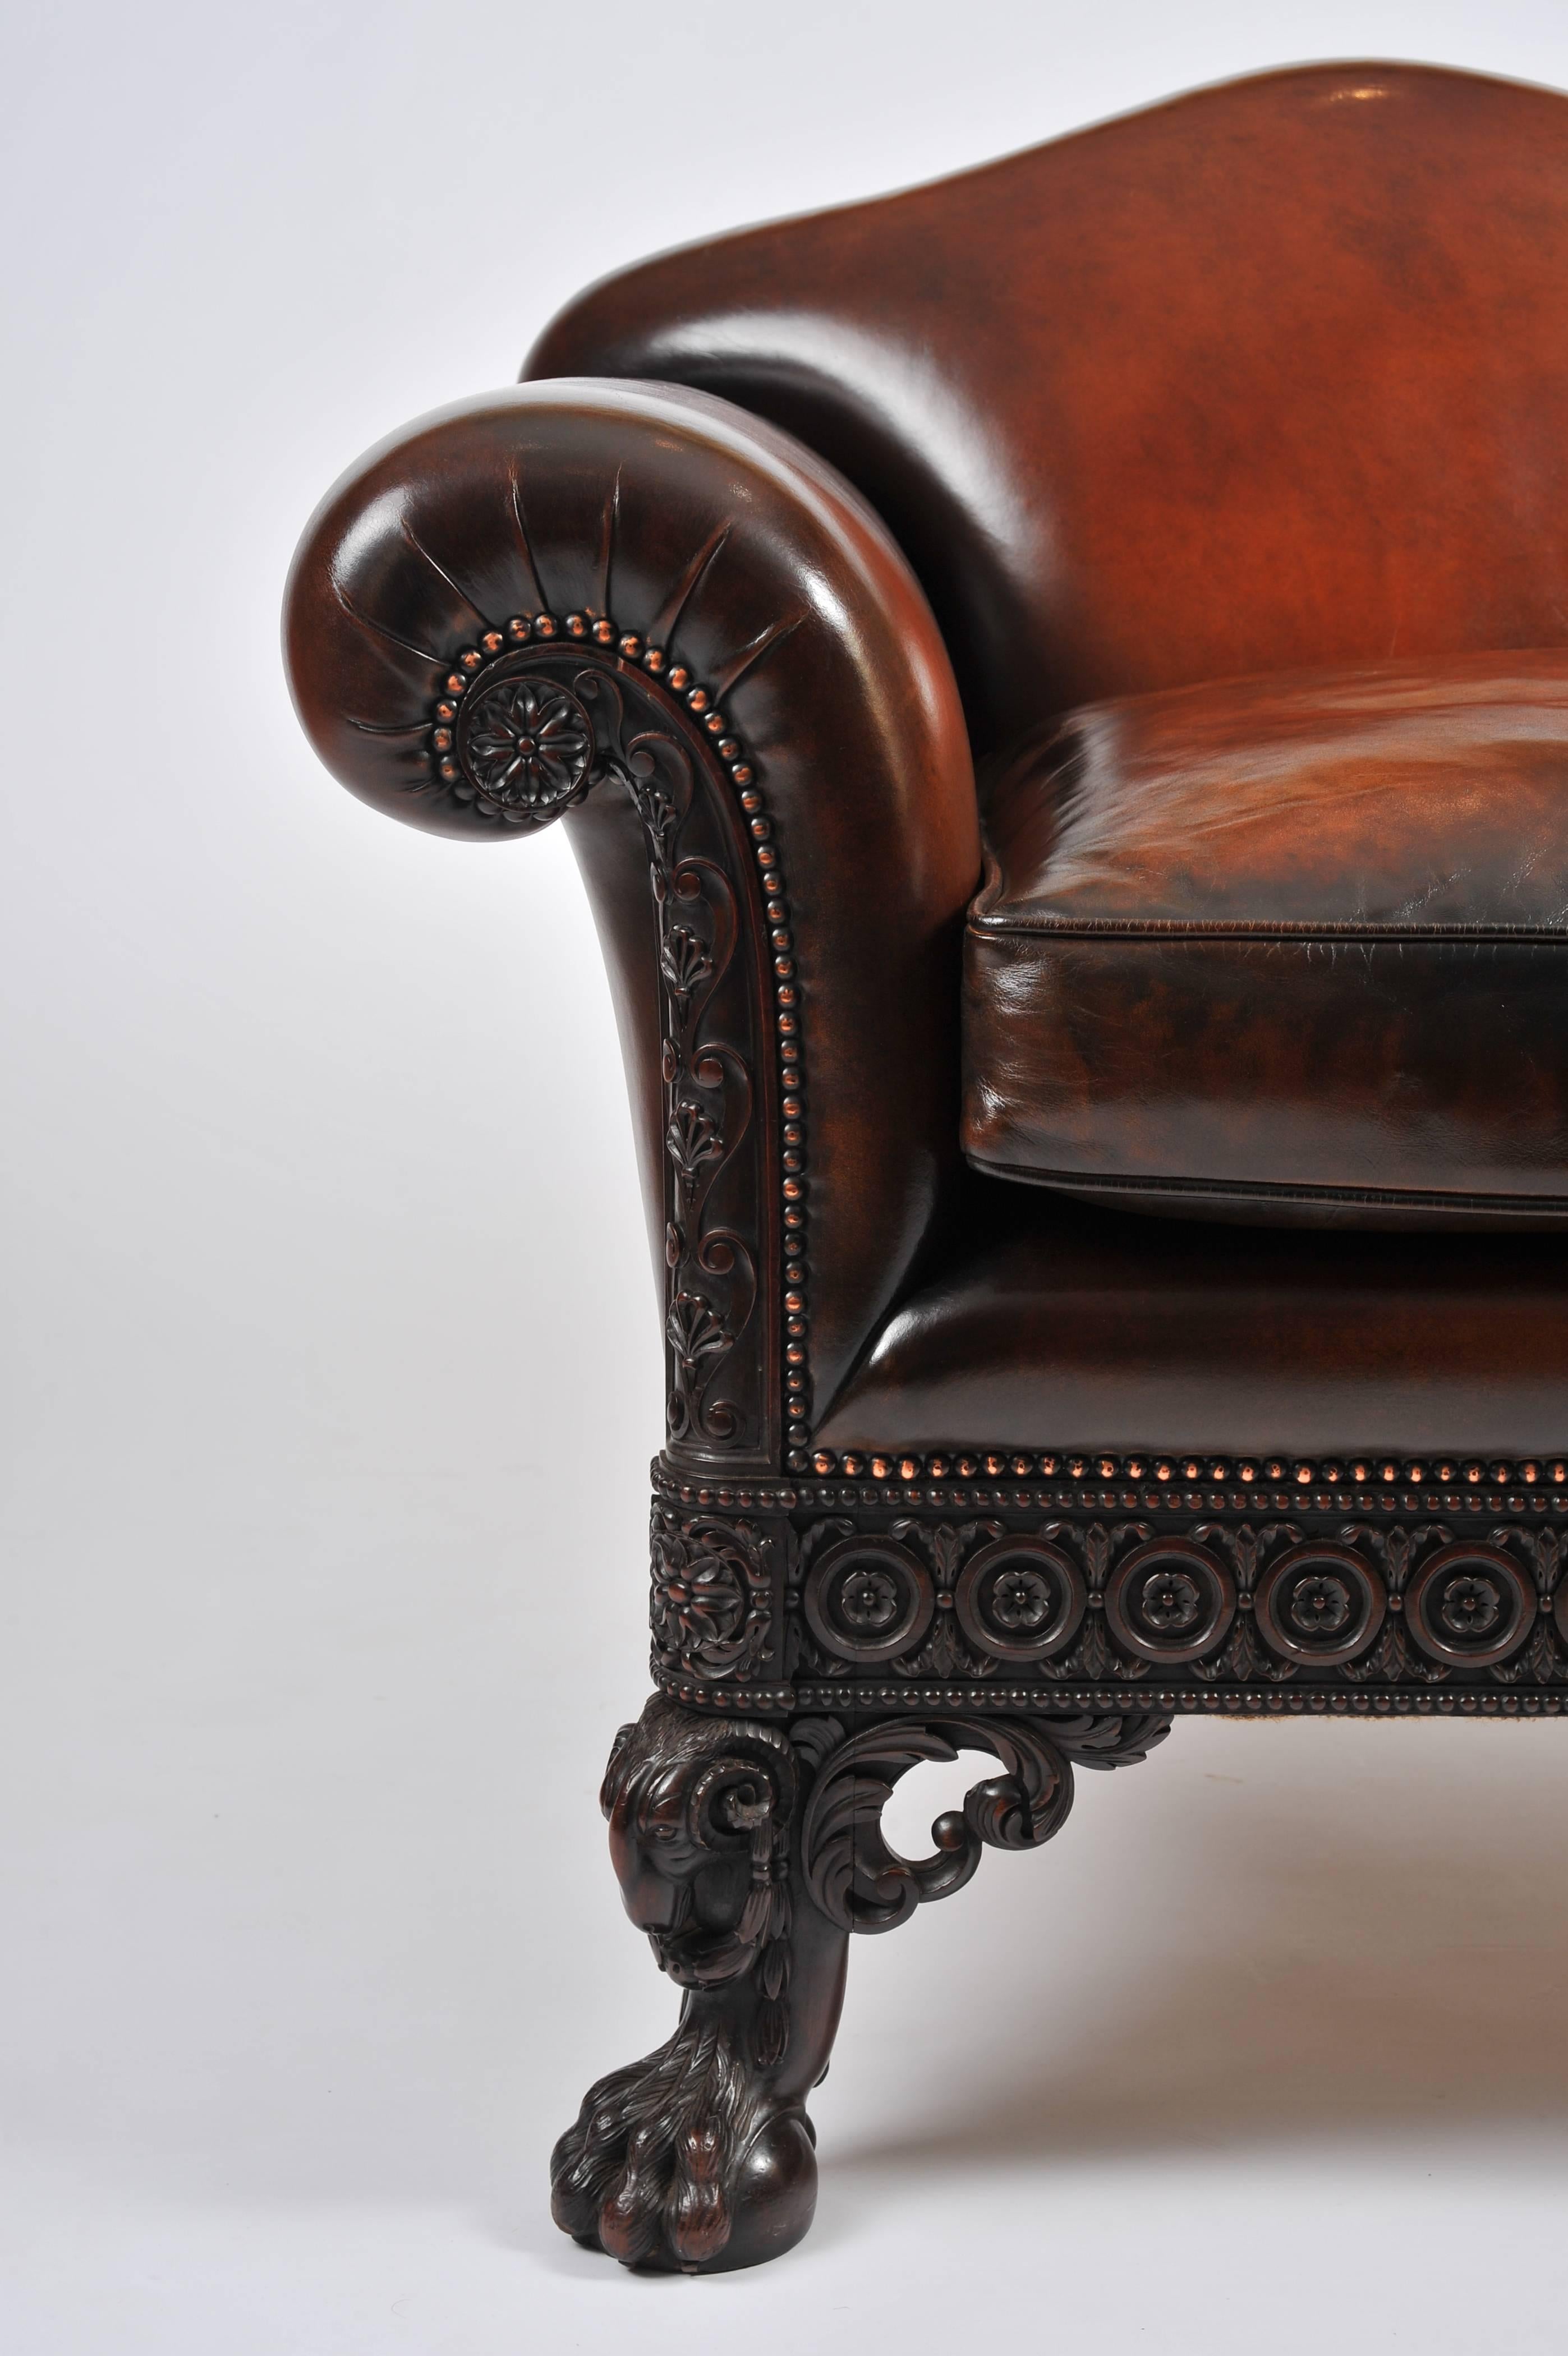 This gorgeous and superb quality leather upholstered deep armchair features a shaped back with scrolled back arms and a separate seat cushion. The carving to the mahogany base is intricate and finely detailed in design, with a circular and floral